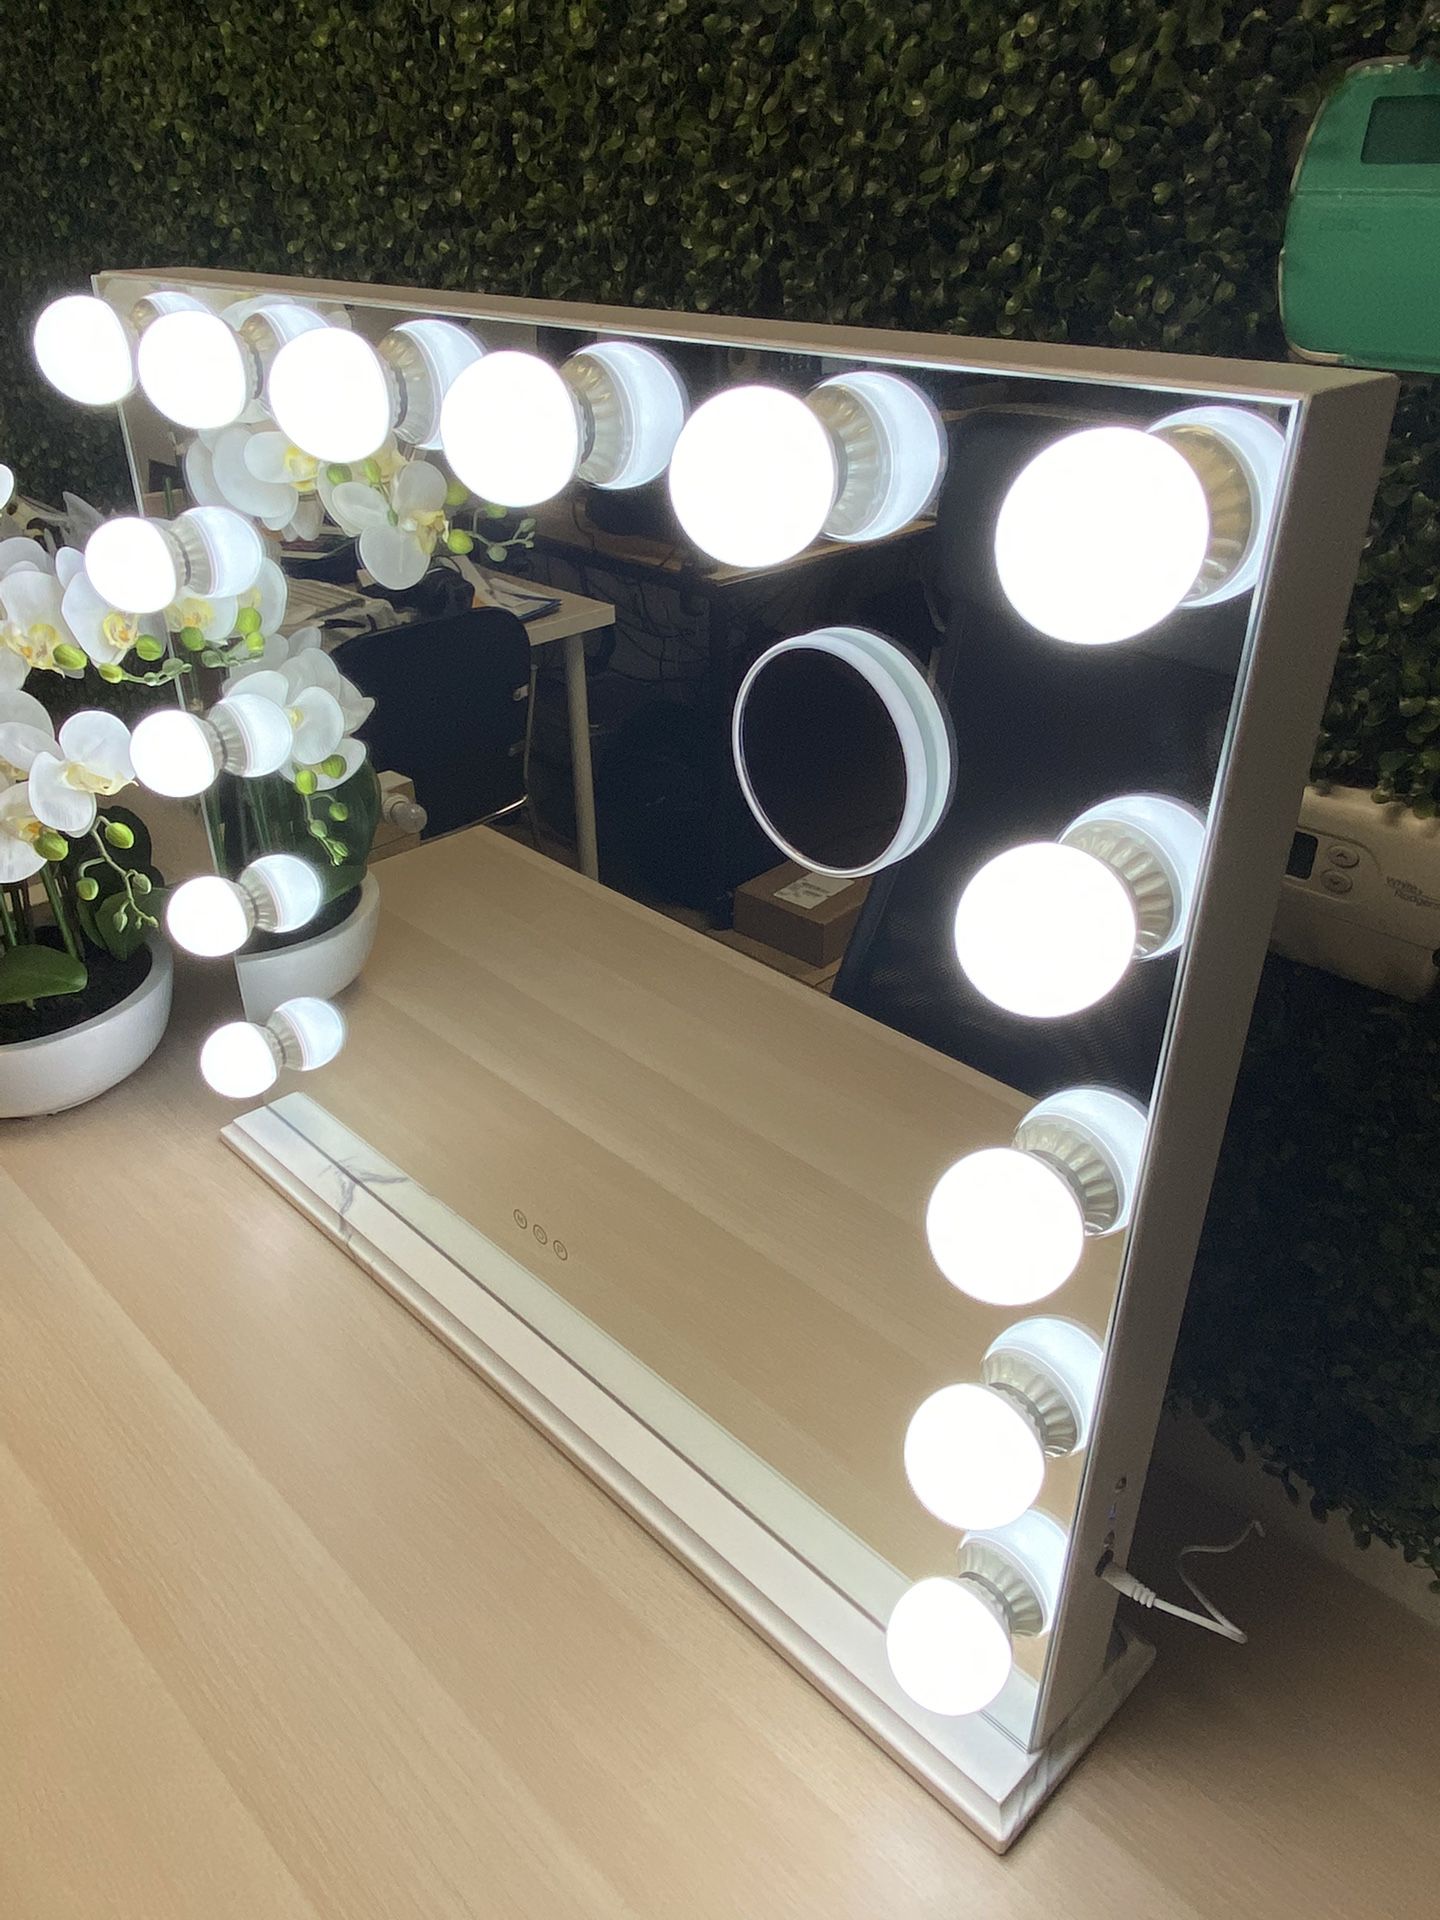 Hollywood Vanity Mirror with Lights, Large Light Up Makeup Mirror with 3 Color Lighting Mode USB Charging Port,14 Dimmable LED Bulbs 